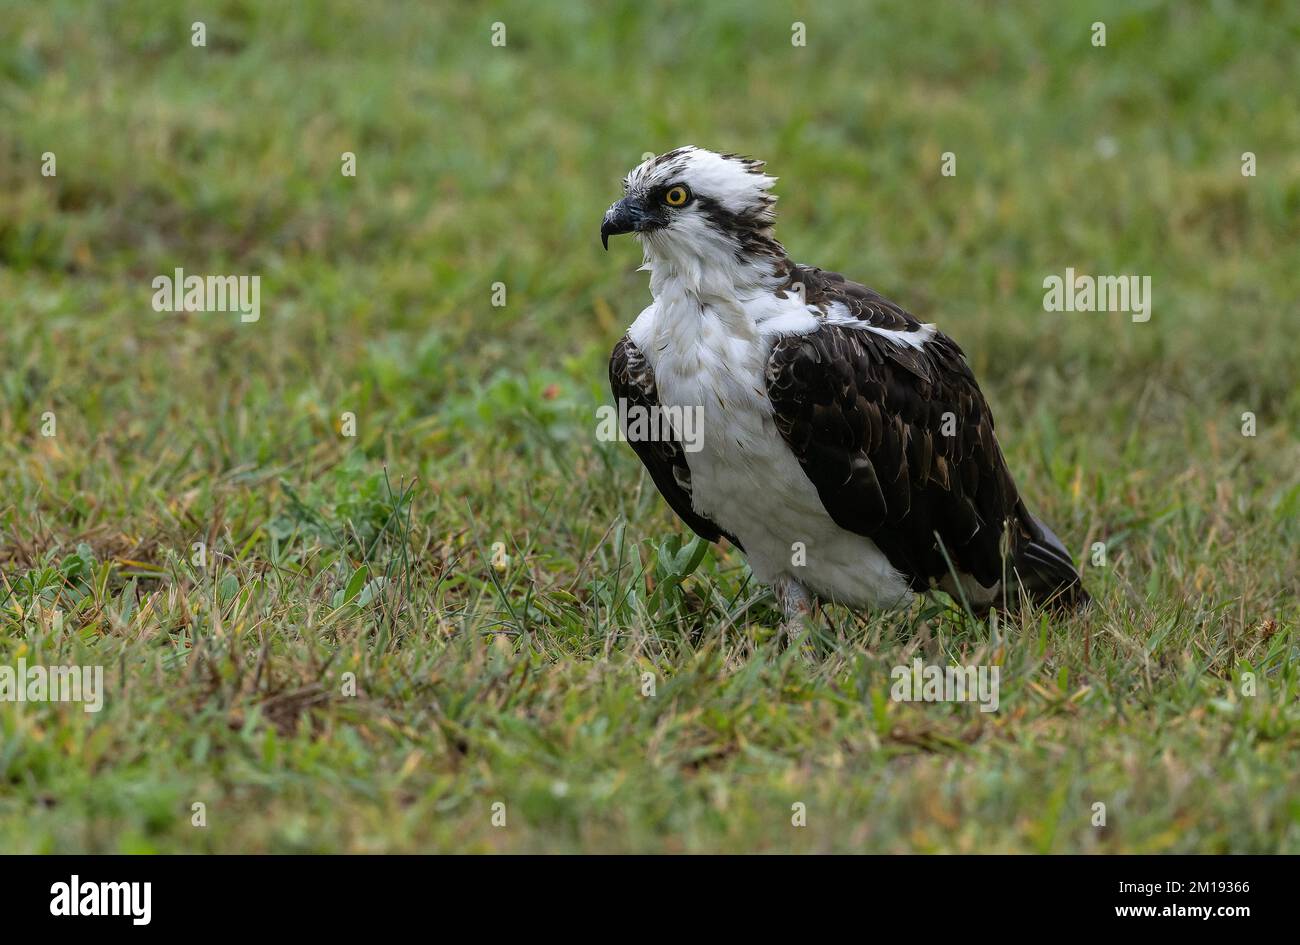 Osprey, Pandion haliaetus, sheltering on the ground during stormy weather. Stock Photo